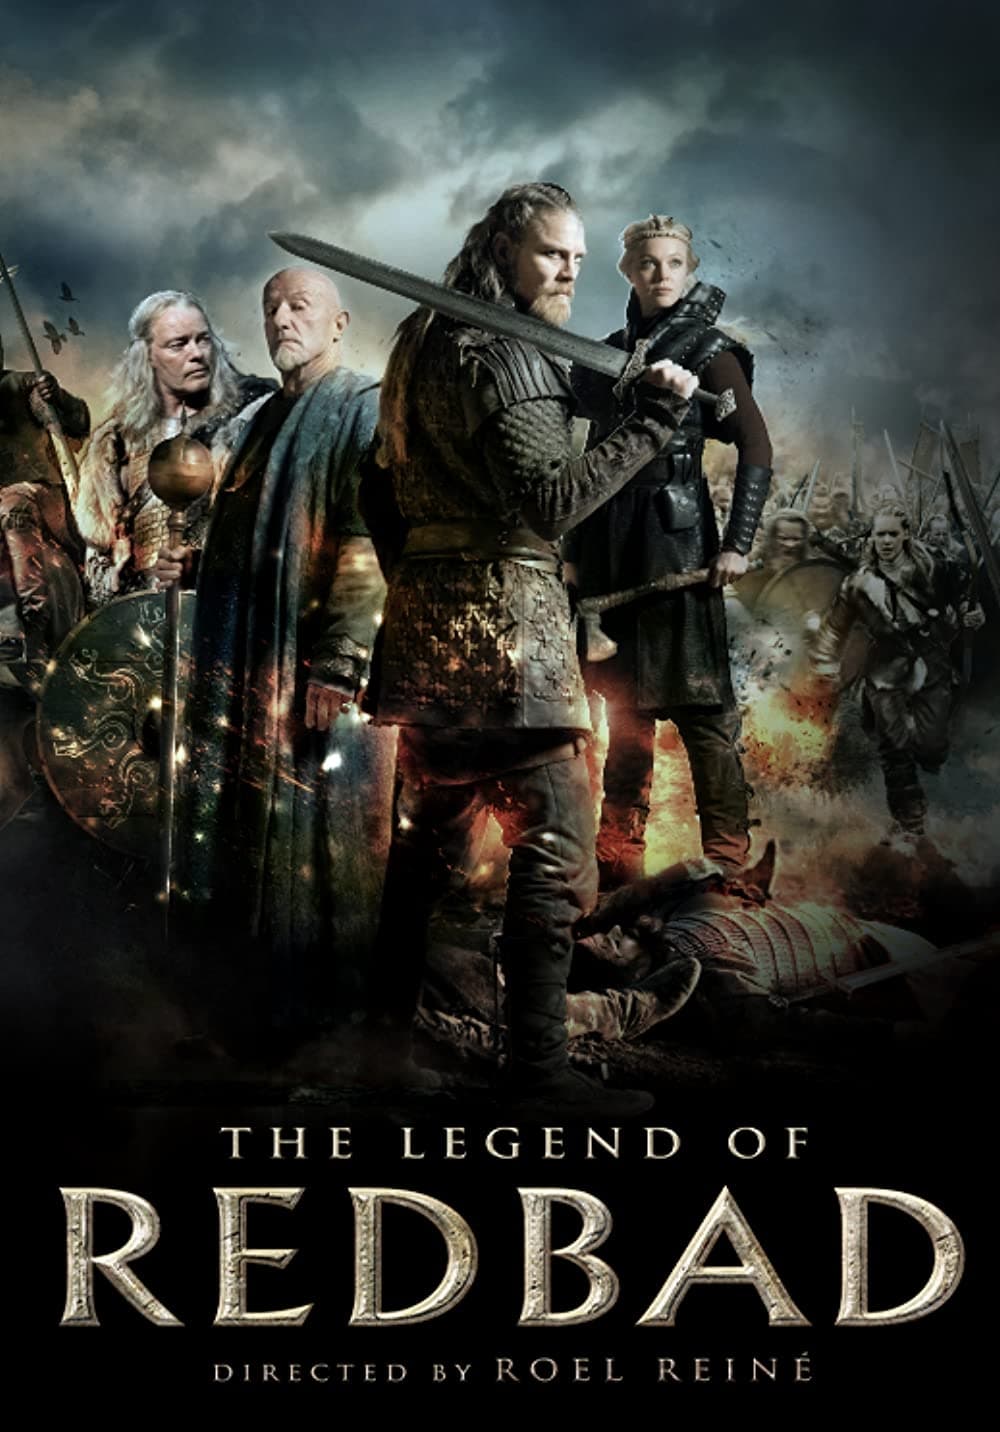 Redbad - The Legend